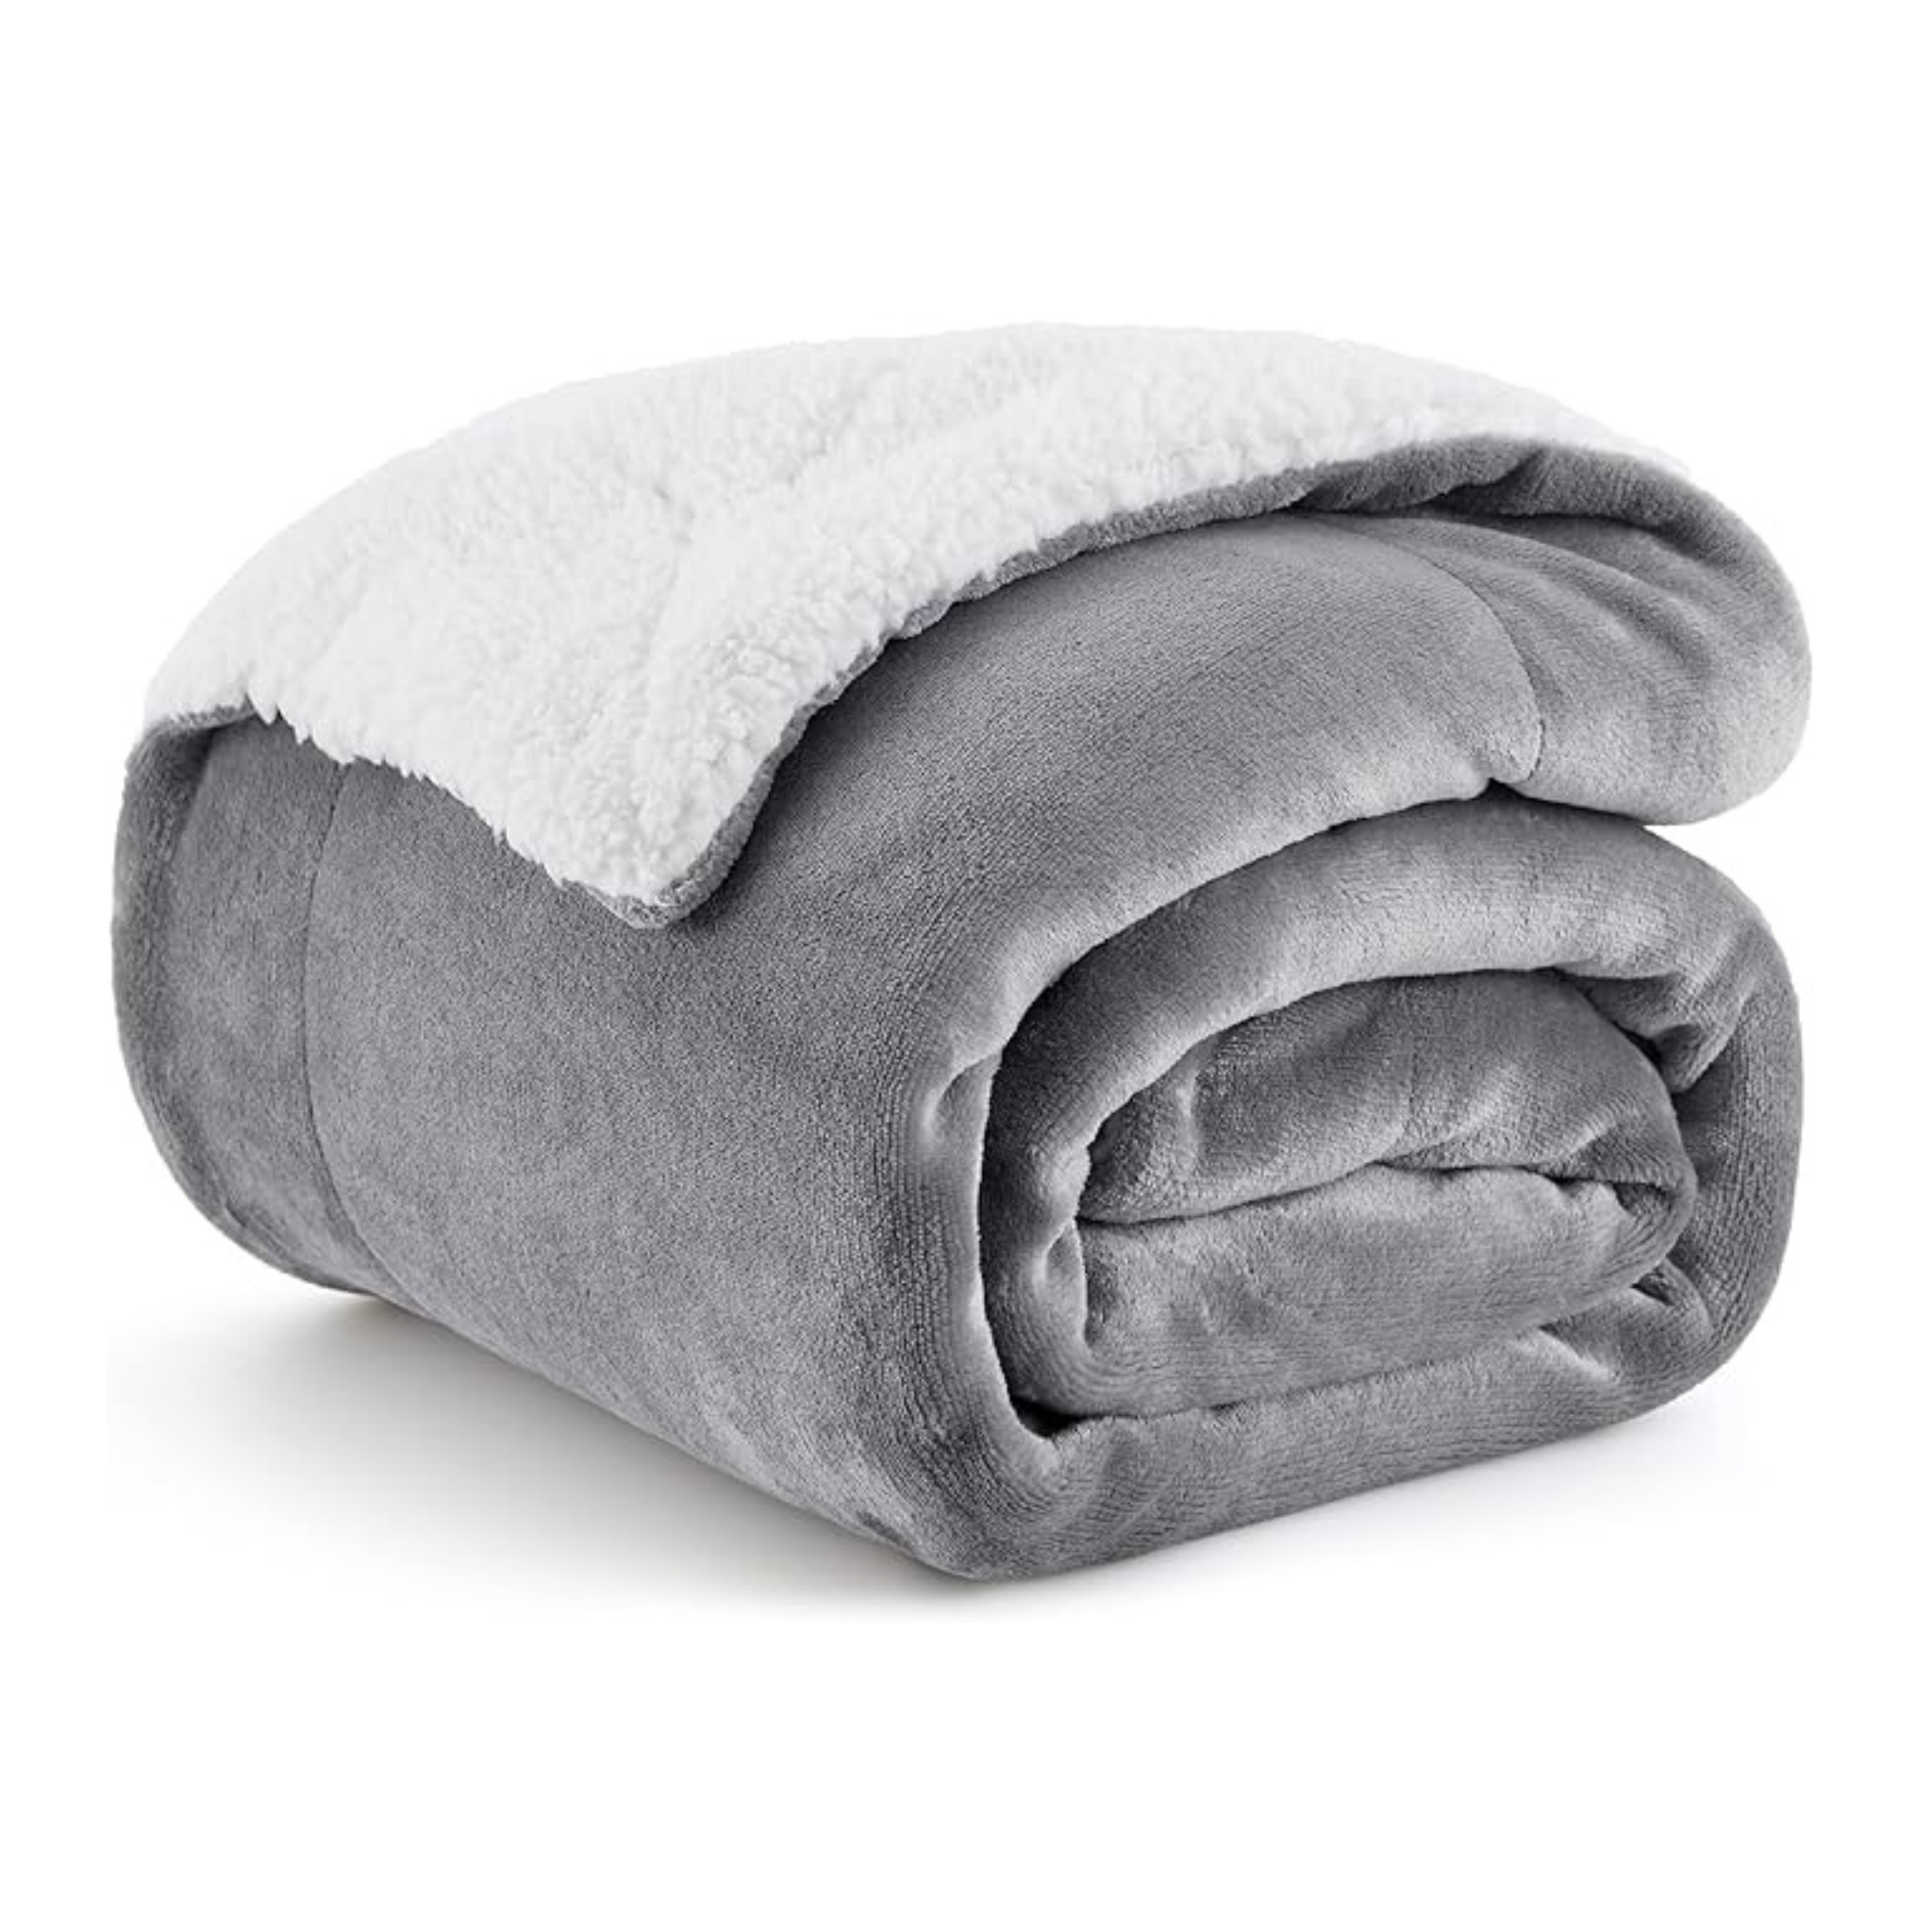 Bedsure Sherpa Fleece Throw Blanket for Couch